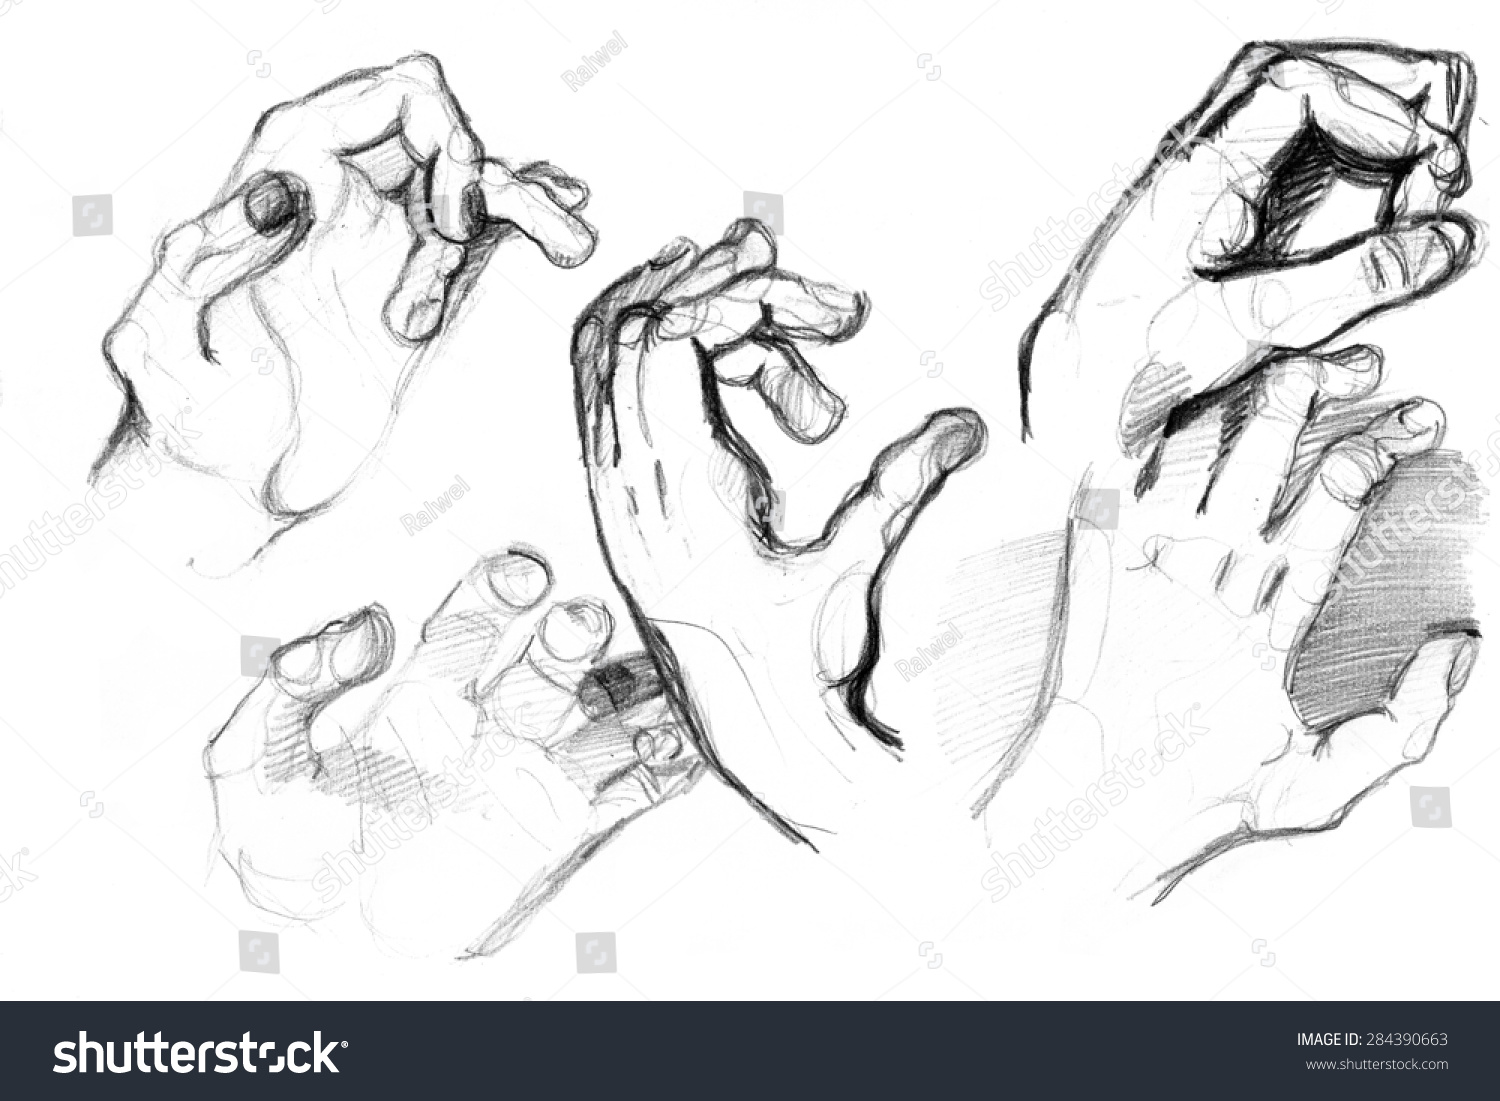 Hand Collection, Original Drawing,Pencil Technique. Stock Photo